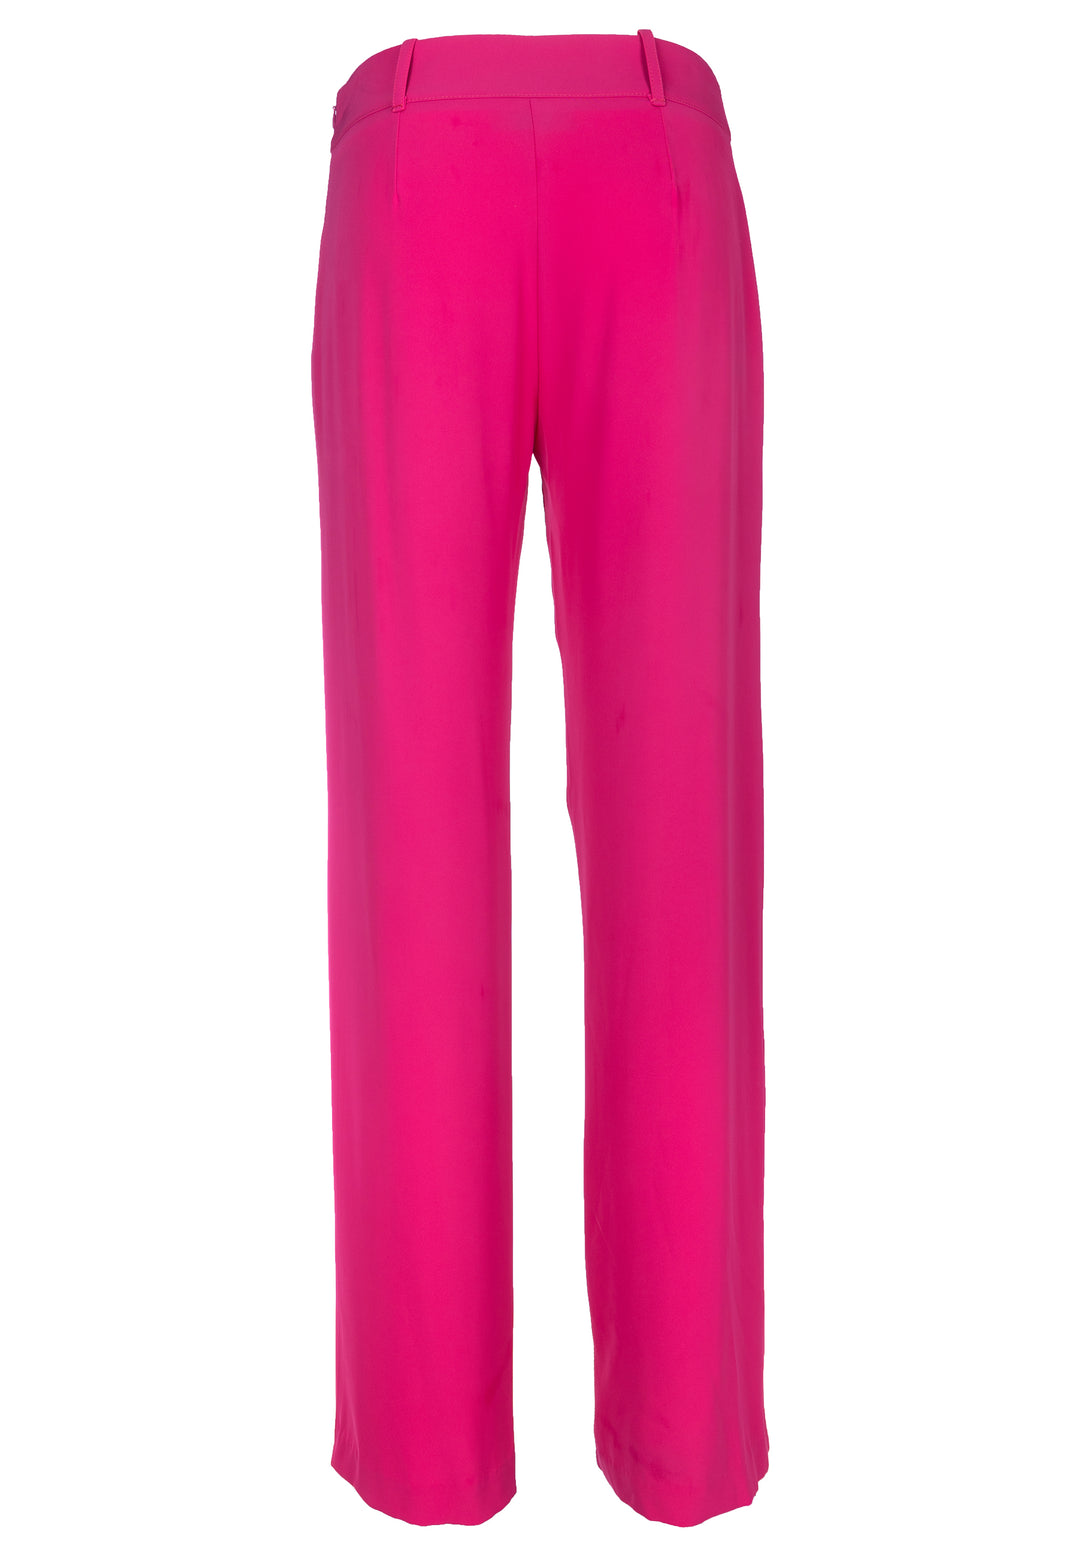 Palazzo pant wide fit made in technical fabric